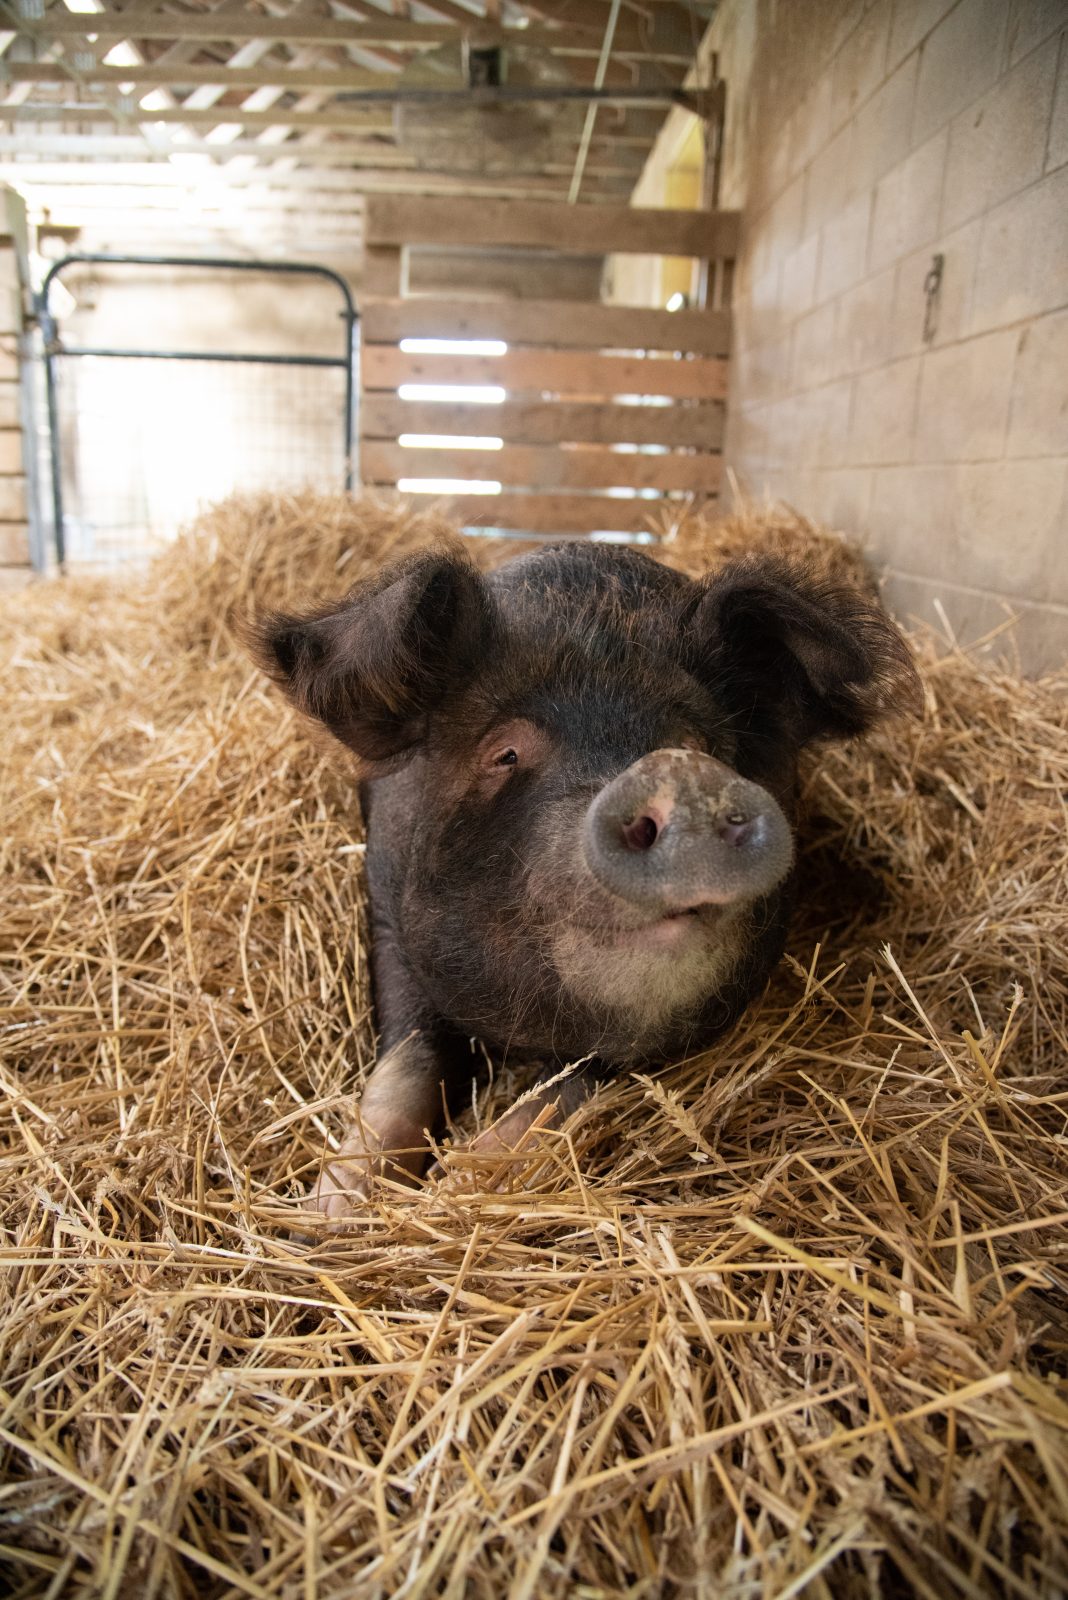 MIssy pig relaxes in the straw at Farm Sanctuary